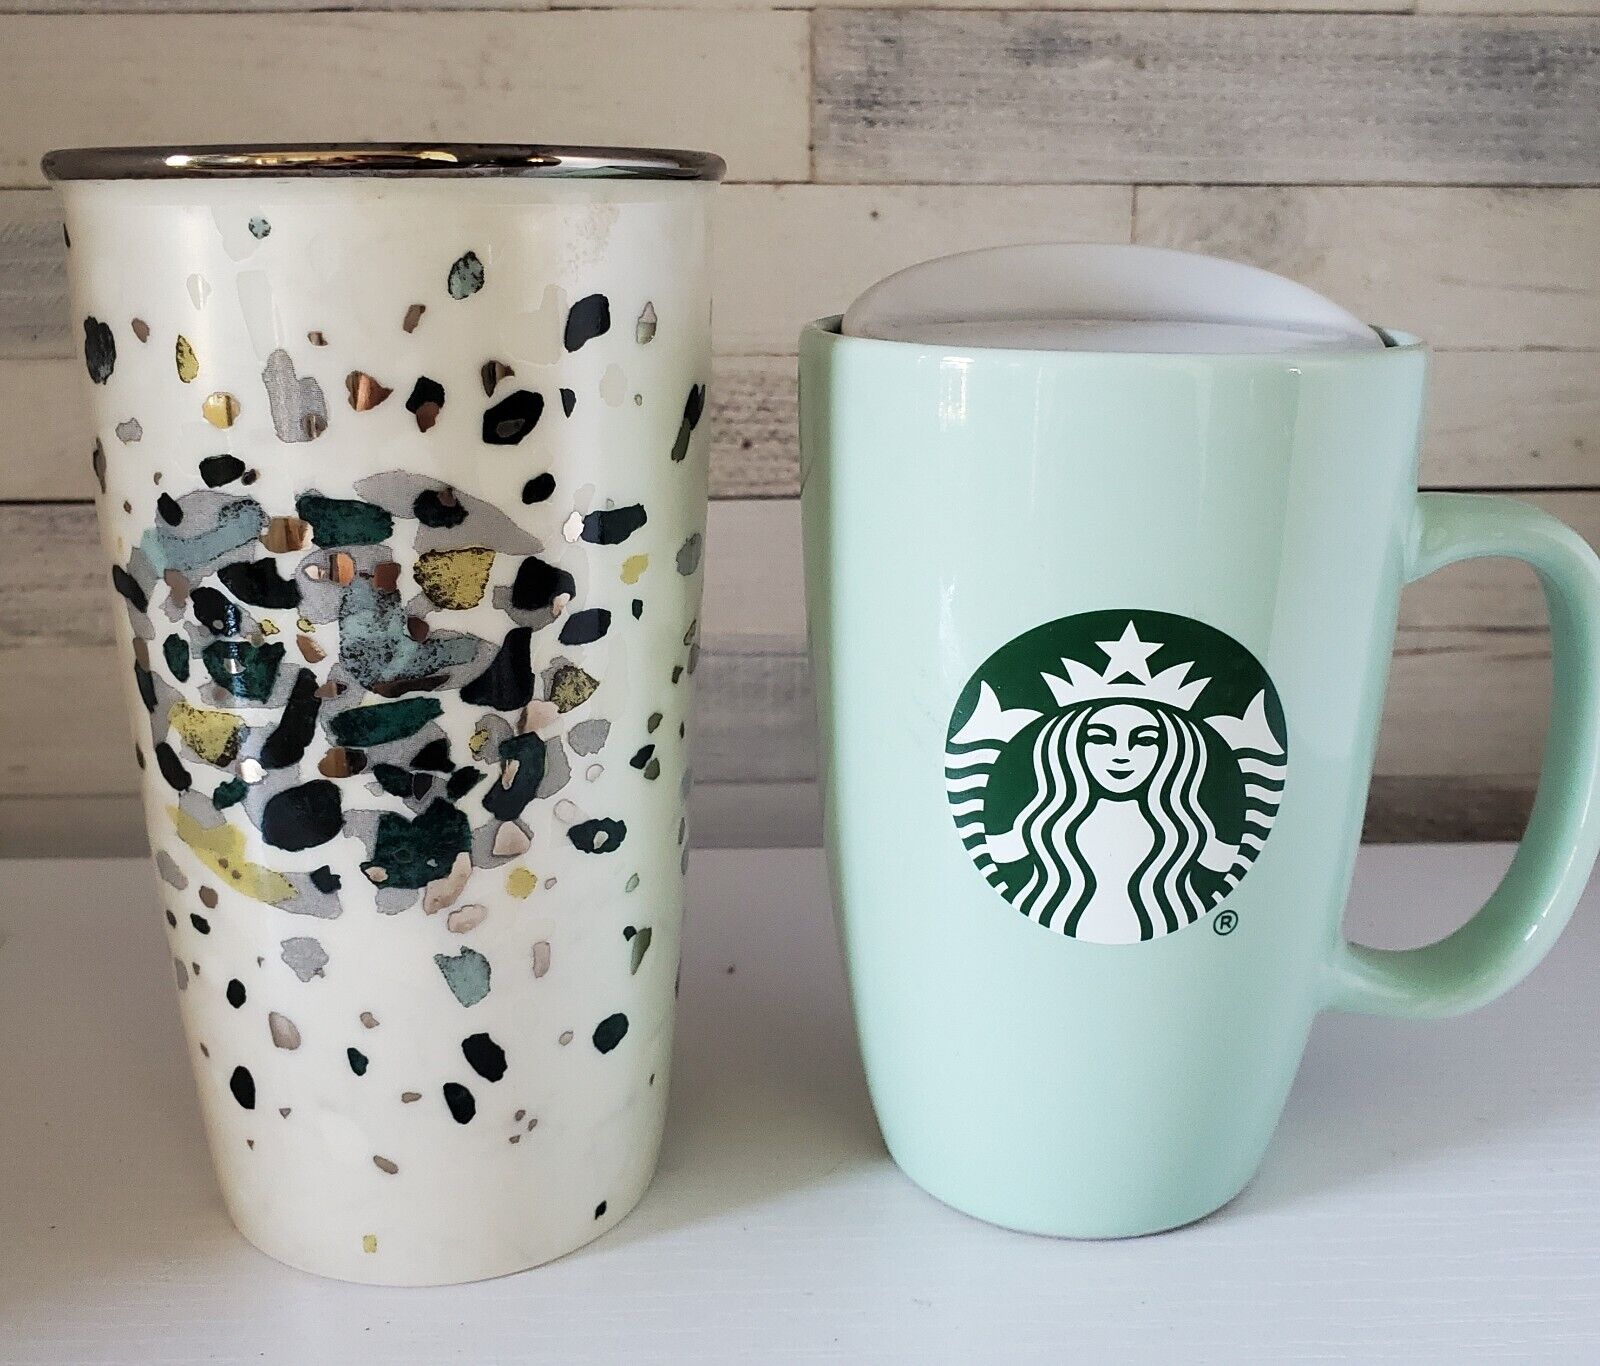 Lot of 2 STARBUCKS Ceramic 12oz Tall Cups With One Interchangeable Lid